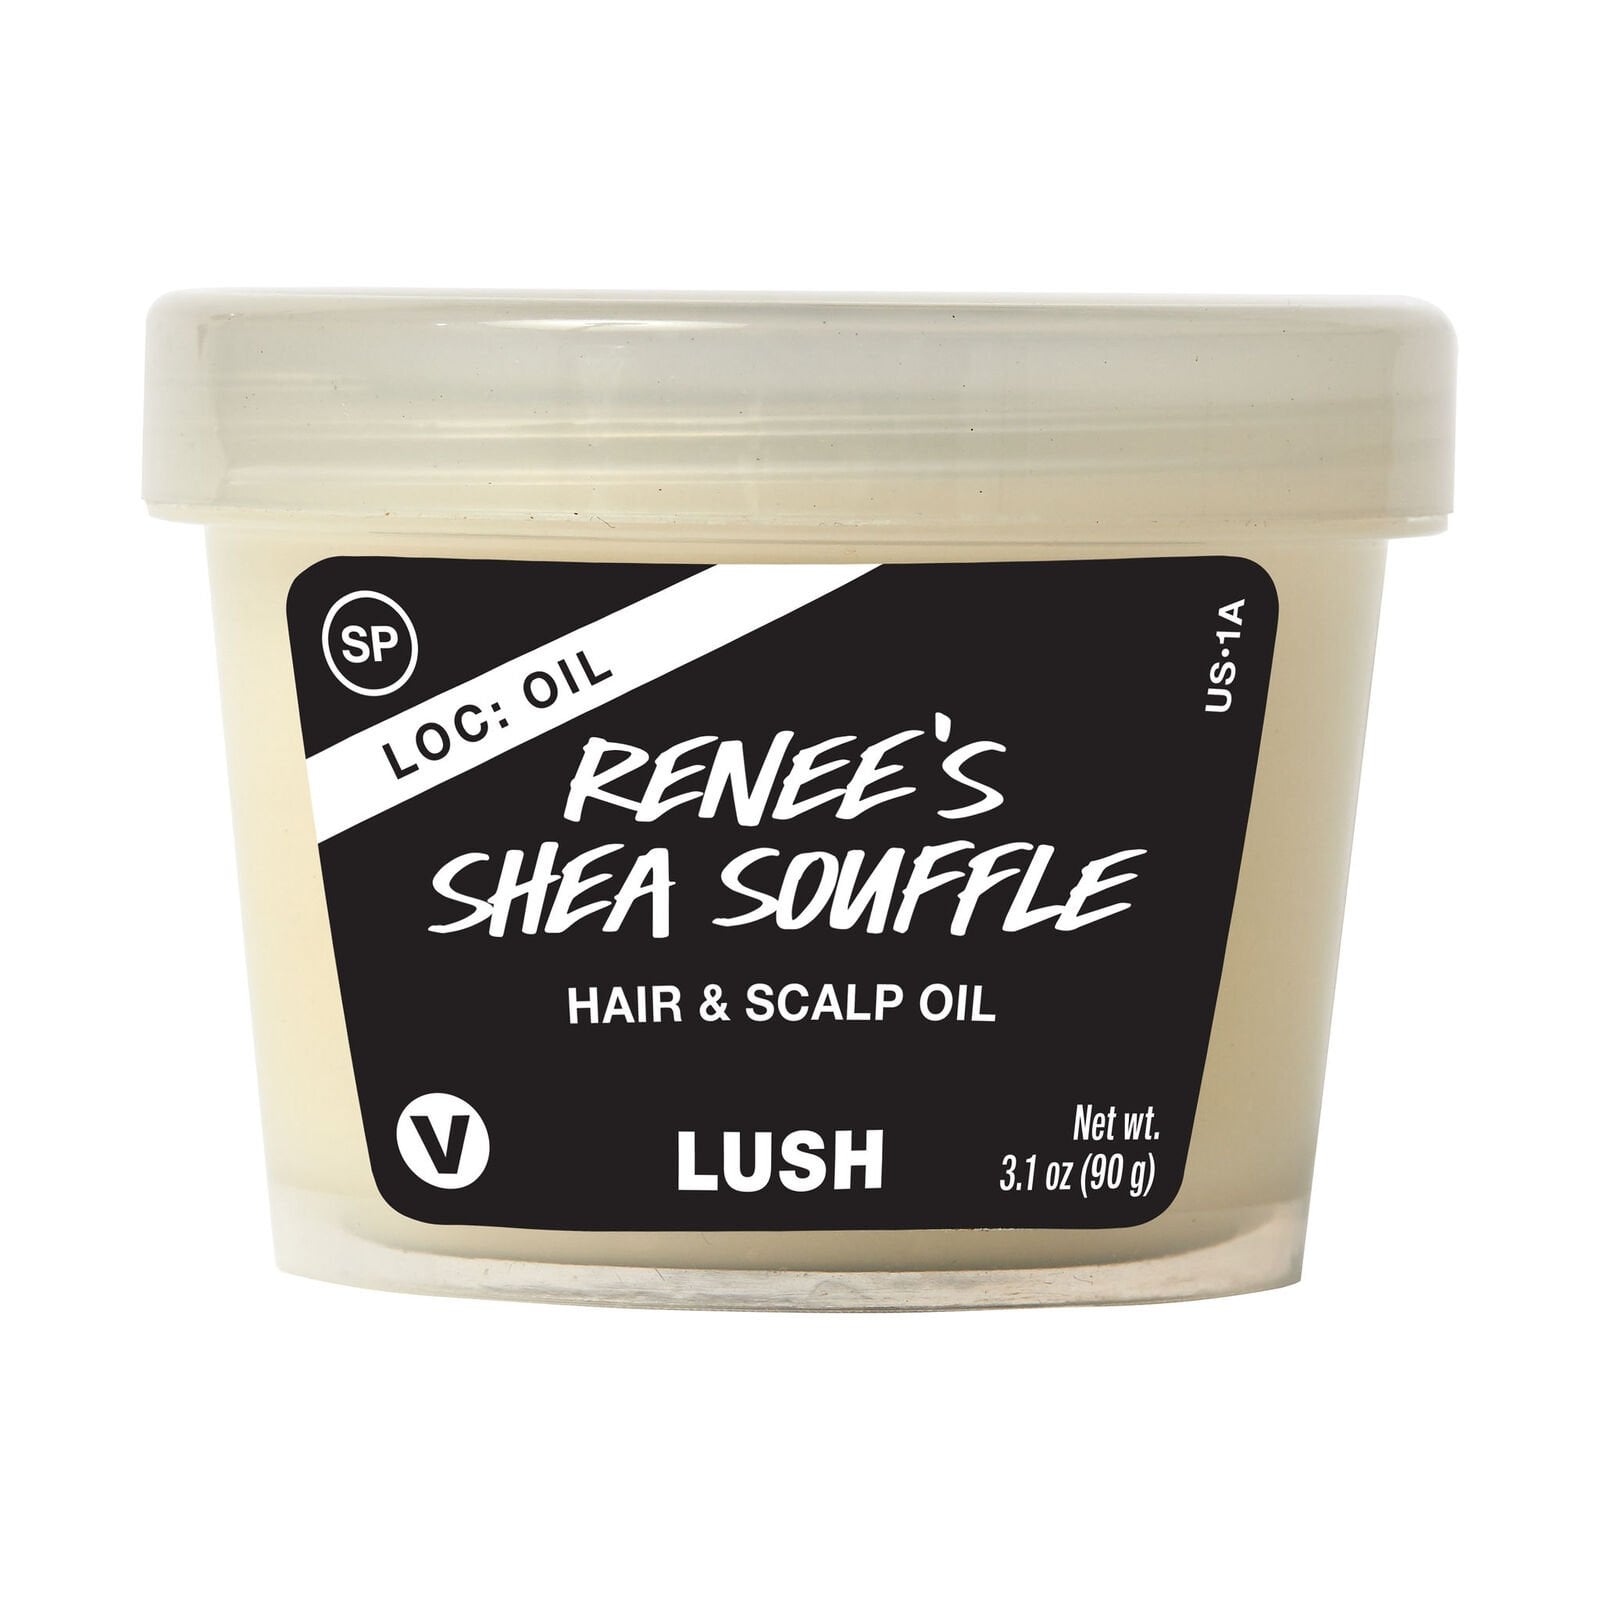 Lush Curls, Coils, and Texture Collection Review | POPSUGAR Beauty